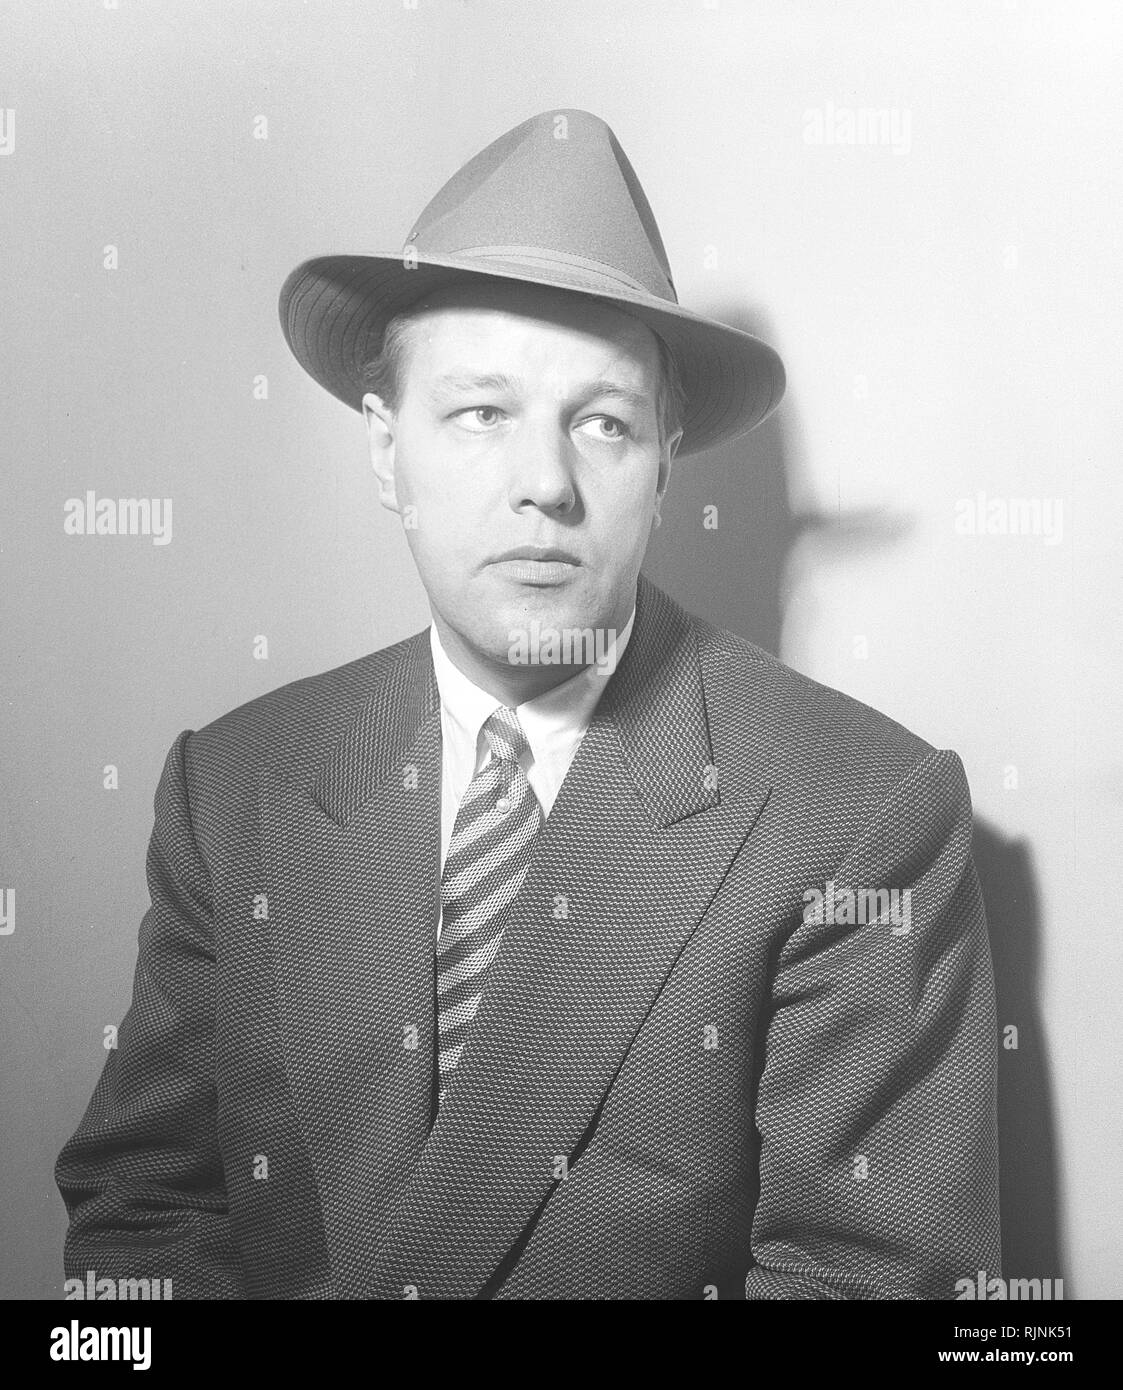 Hat fashion in the 1950s. A man in a suit and tie is wearing a Fedora type  hat. A soft brim and typically creased lengthwise, and pinched near the  front on both